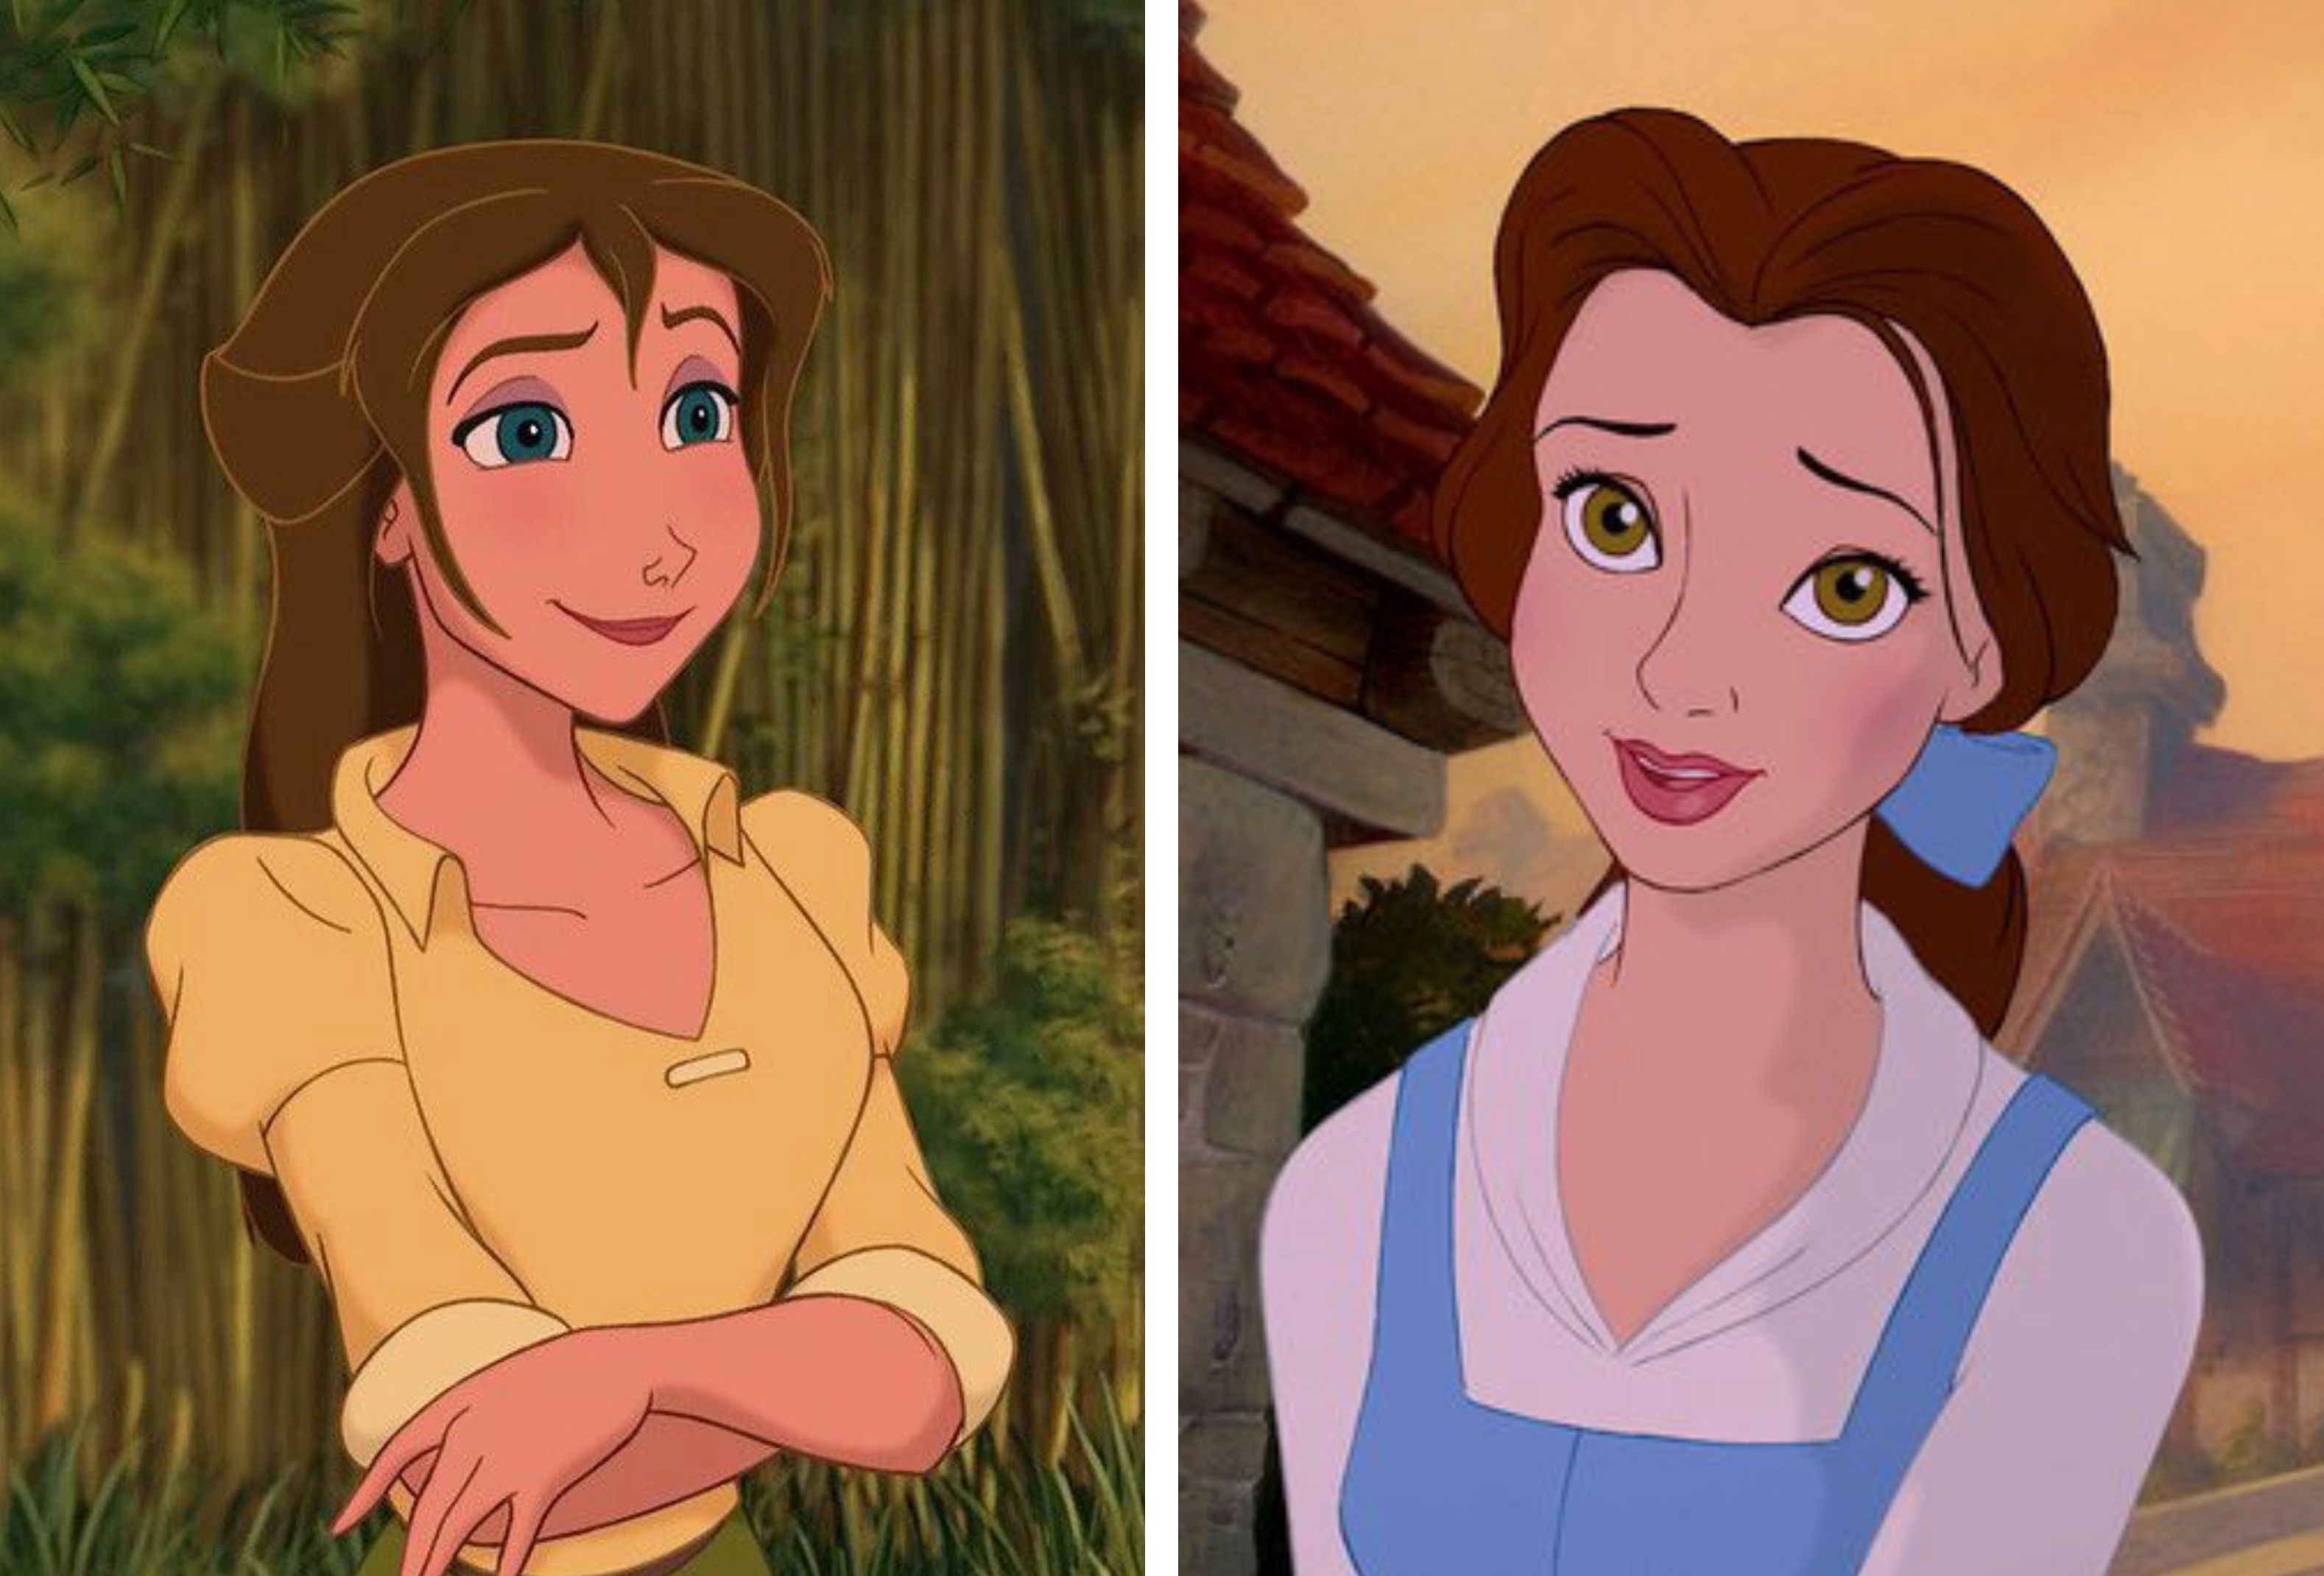 Proof that every female character in Disney or Pixar films has